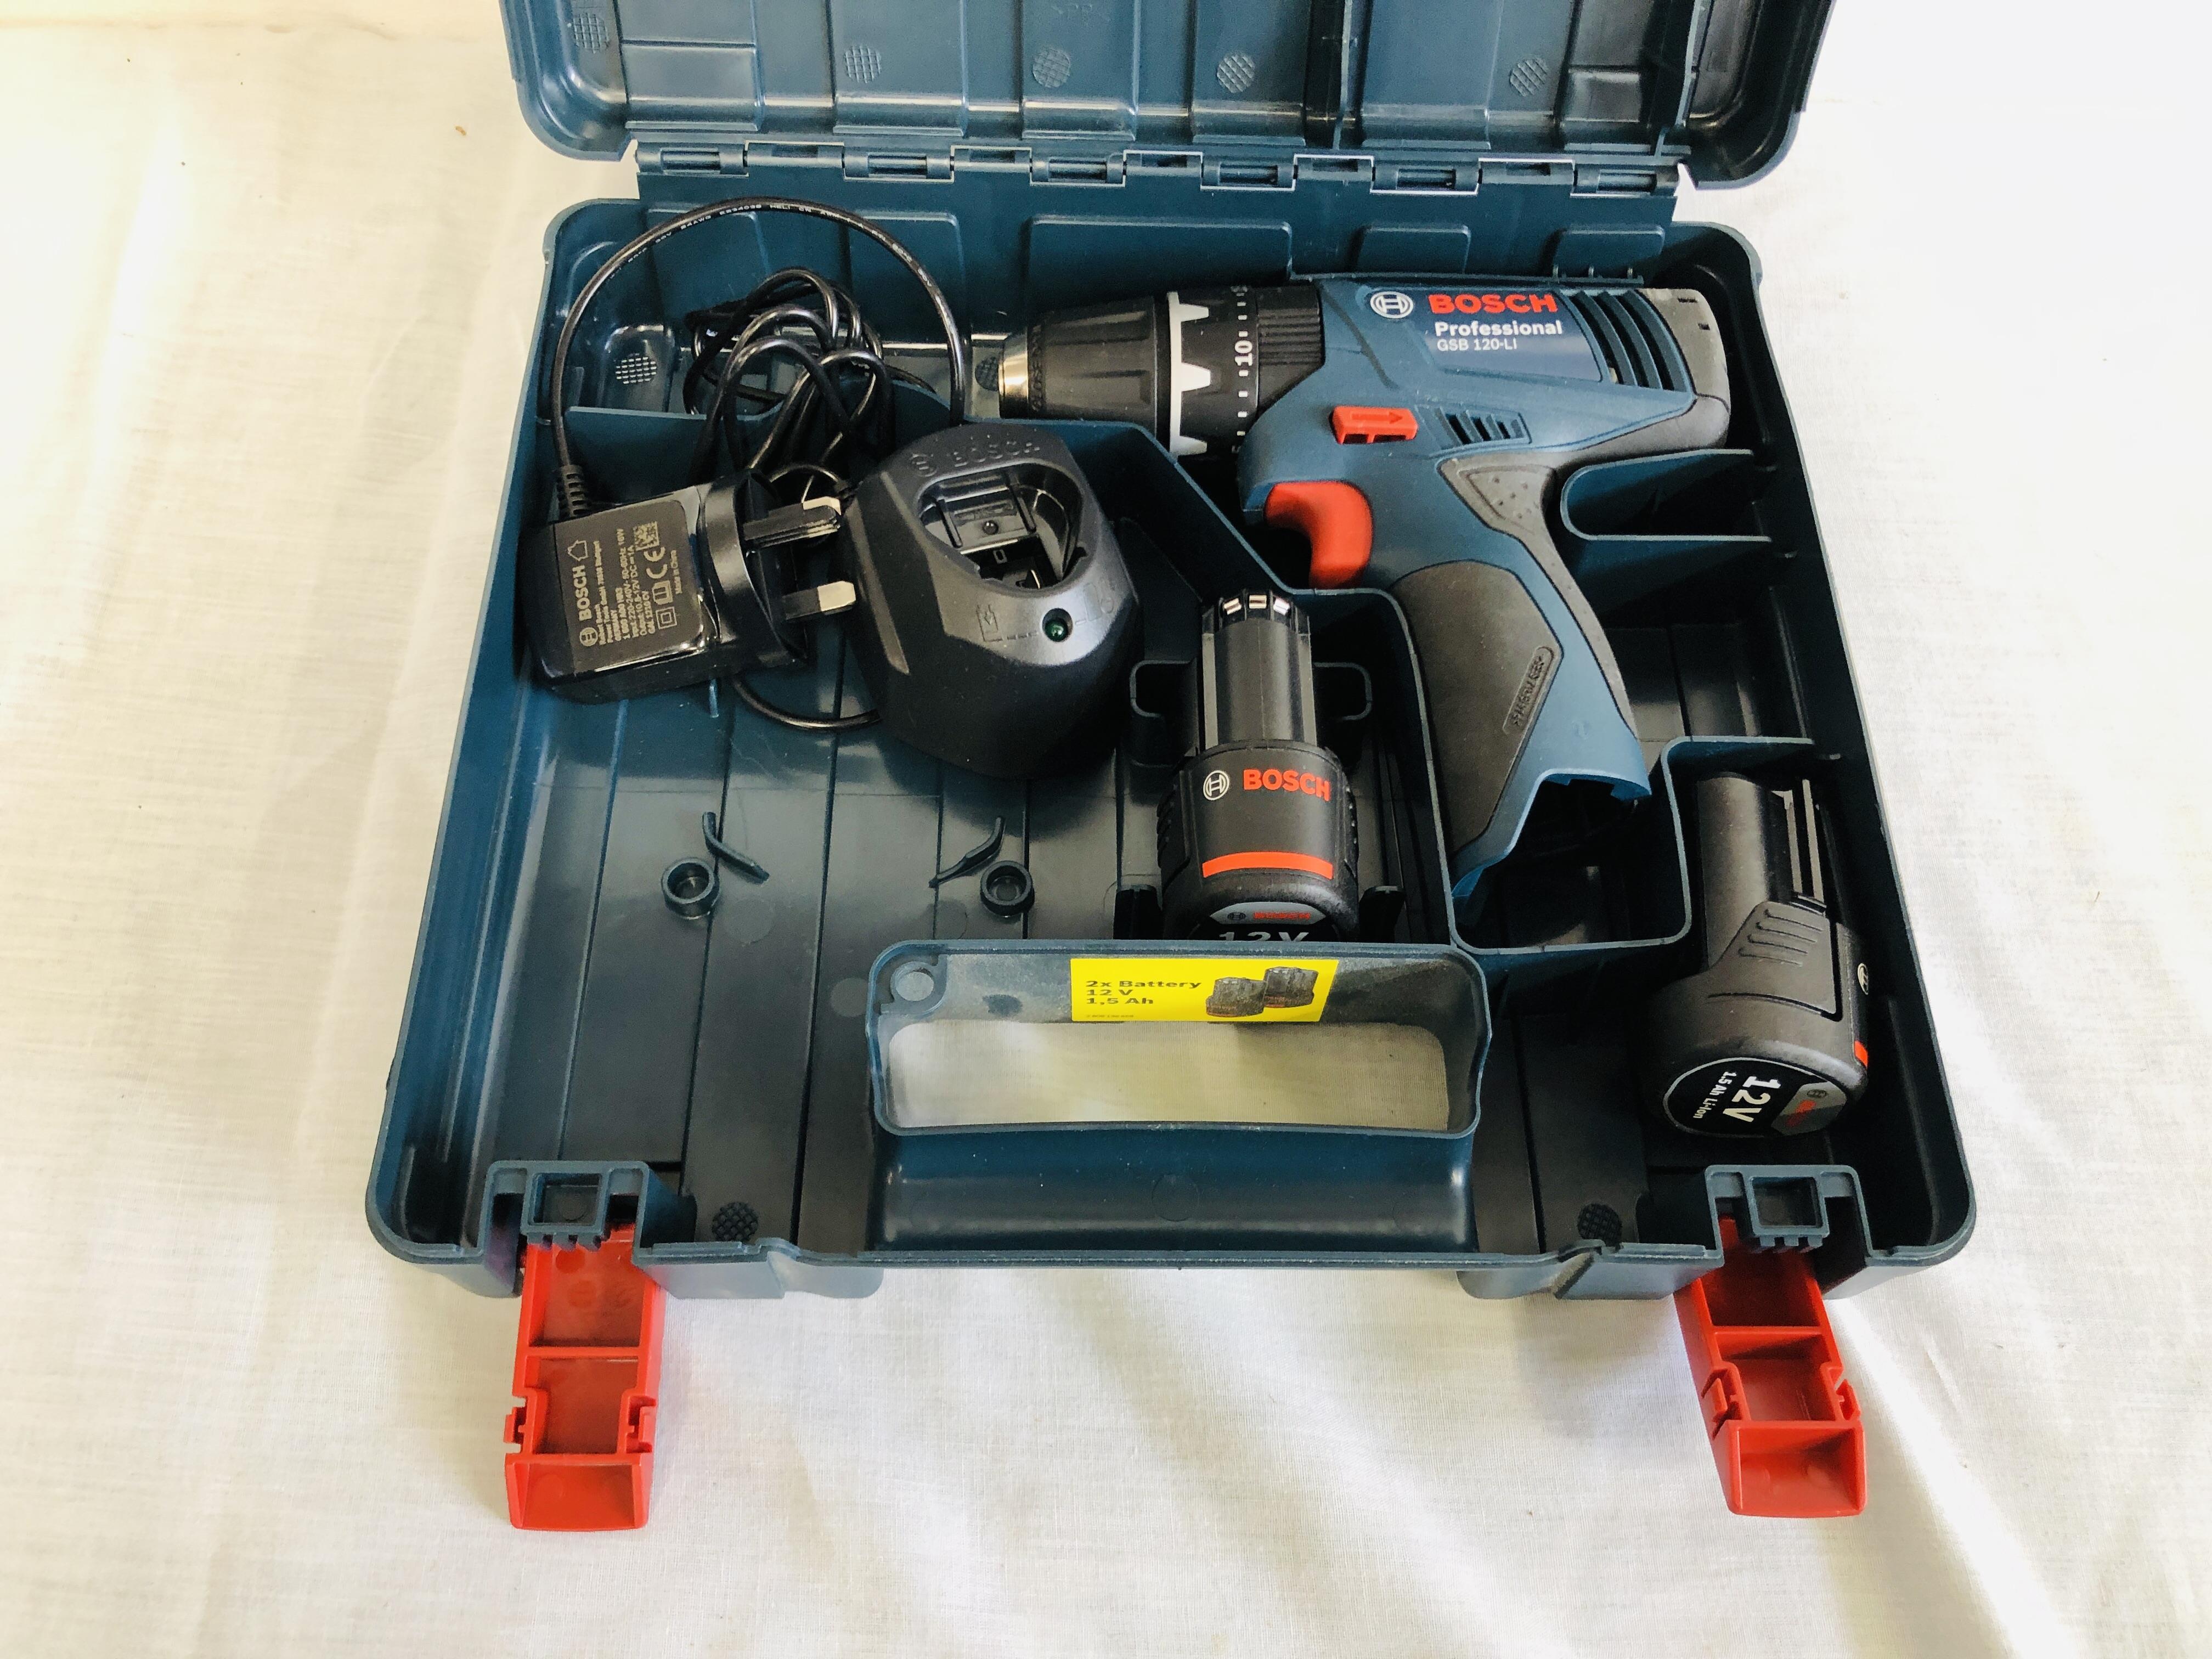 BOSCH GSB 120-LI CORDLESS POWER DRILL CASED WITH CHARGER AND TWO BATTERIES (APPEARS UNUSED) - SOLD